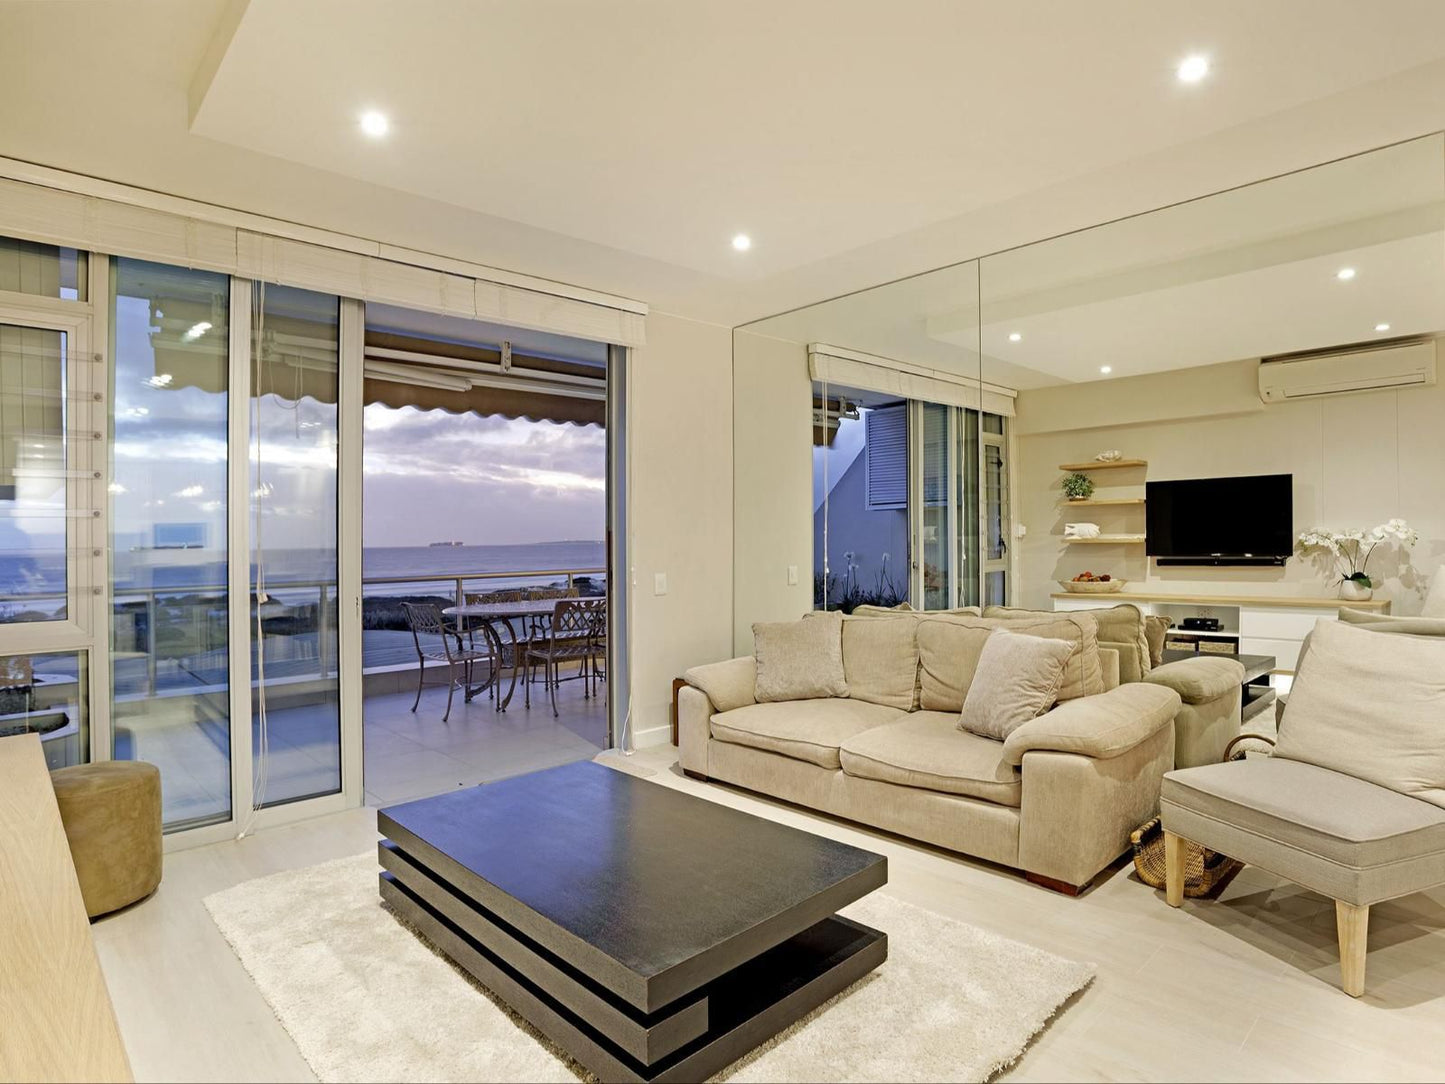 Dolphin Beach H106 By Hostagents Blouberg Cape Town Western Cape South Africa Living Room